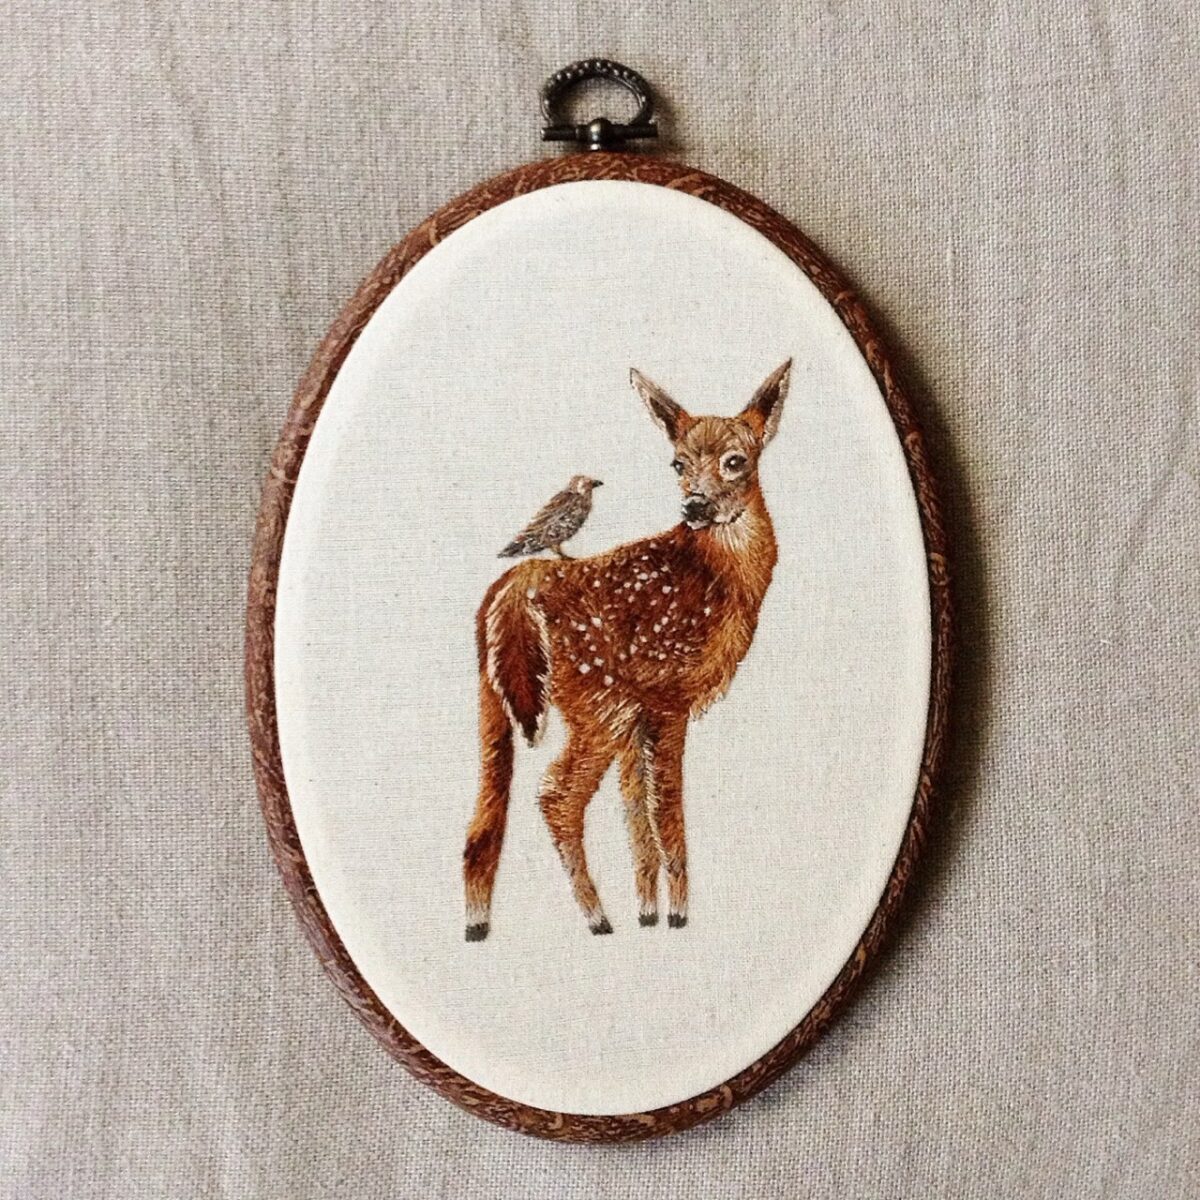 The Magical Embroidery Hoop Art Of Emillie Ferris 14